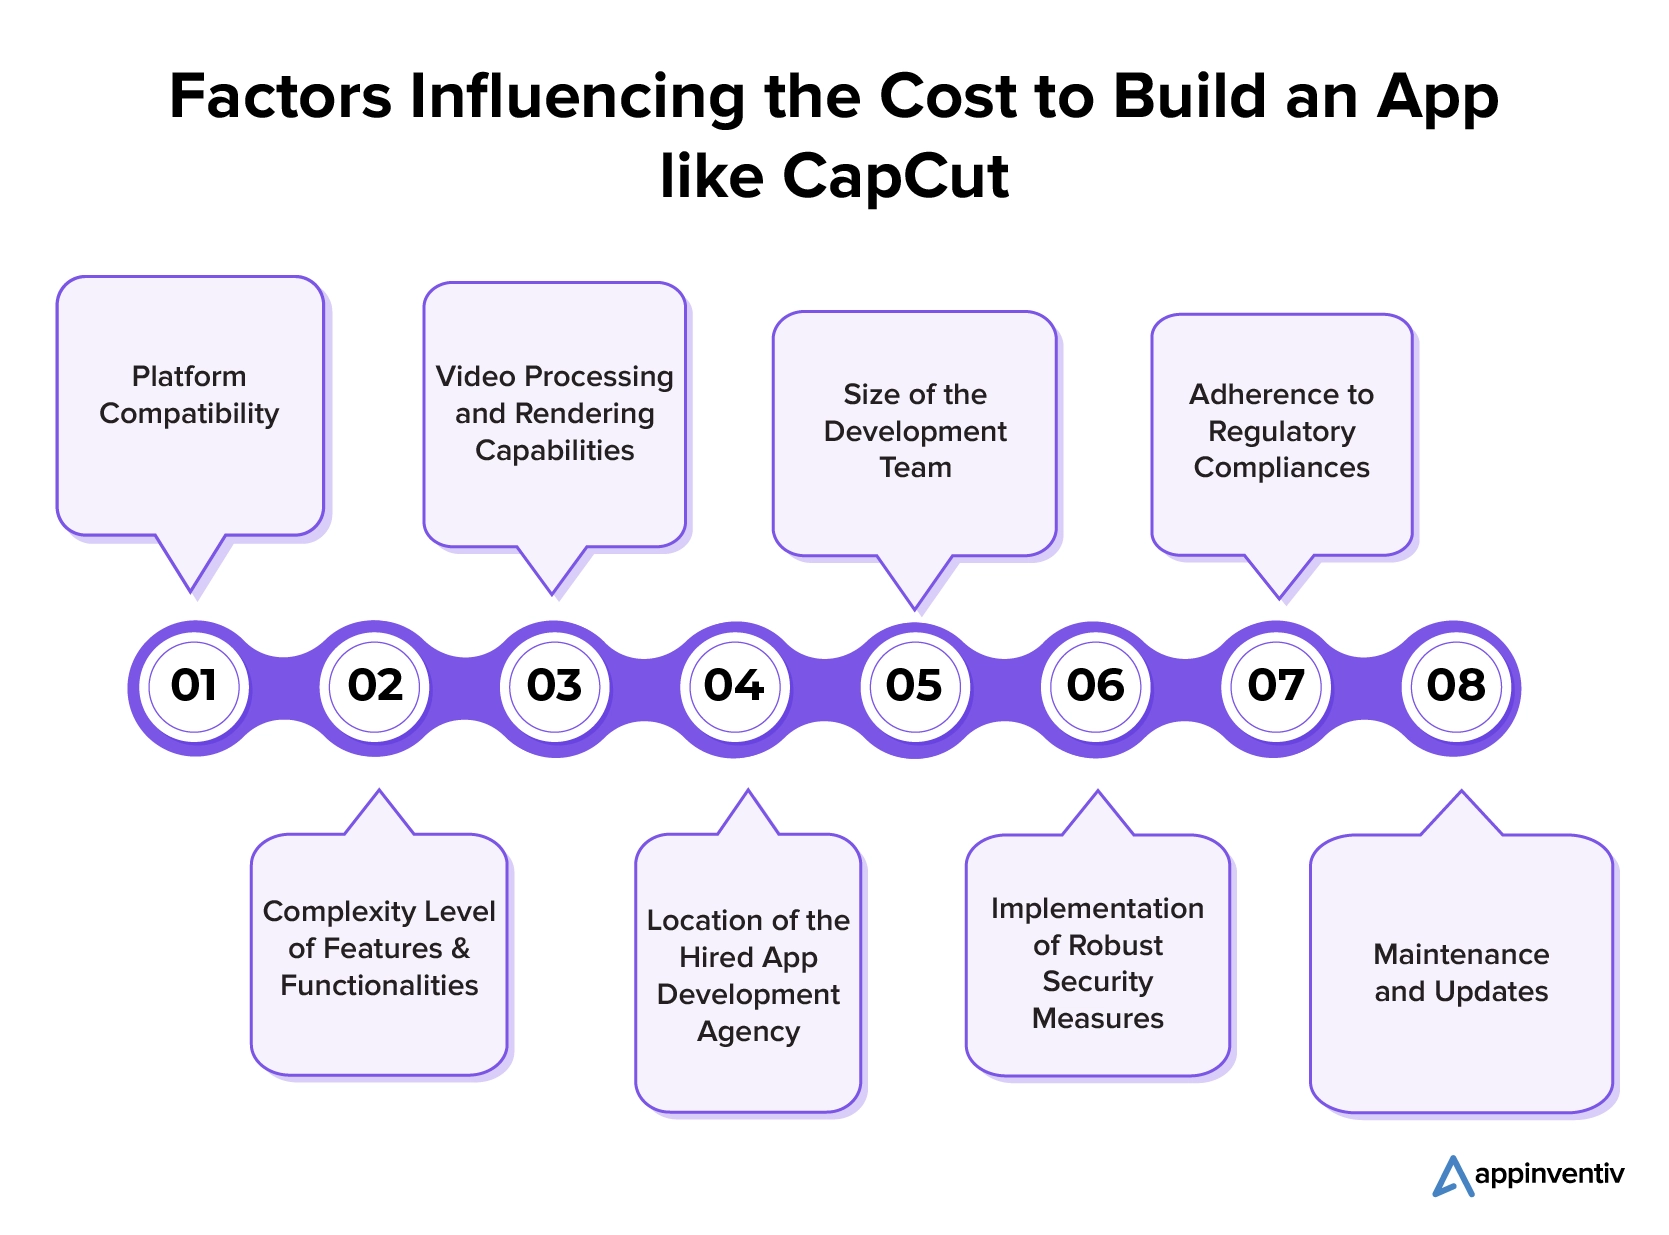 Factors Influencing the Cost to Build an App like CapCut